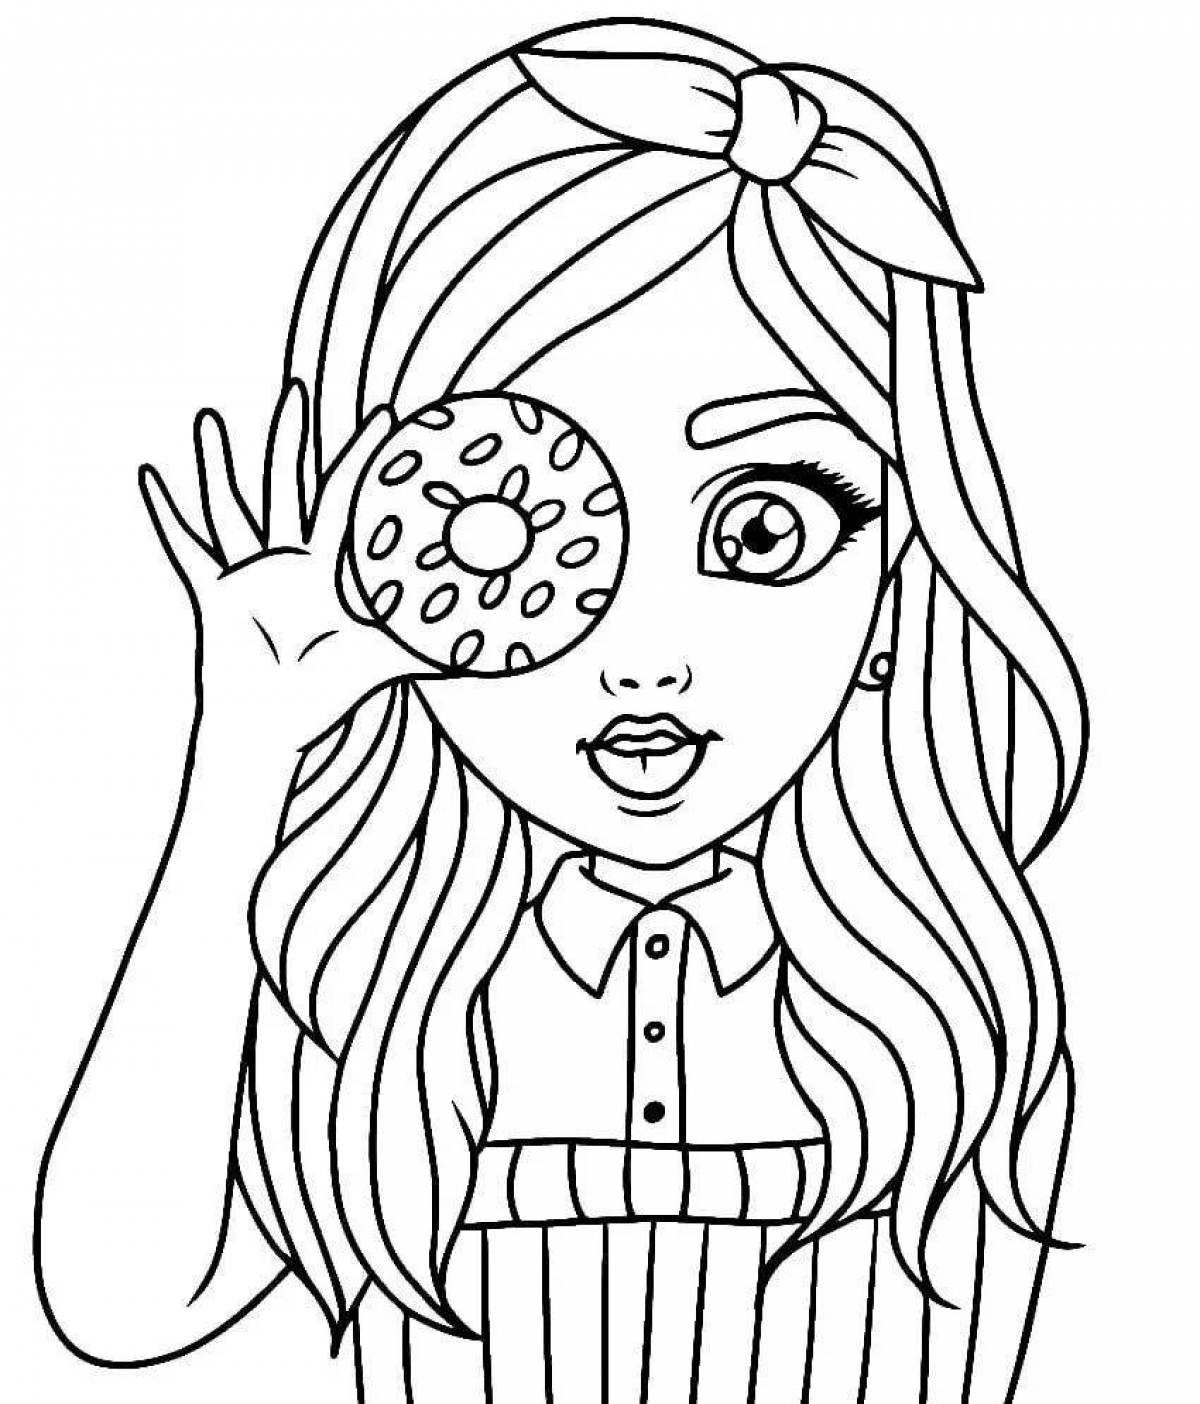 Amazing coloring book for girls 9-10 years old